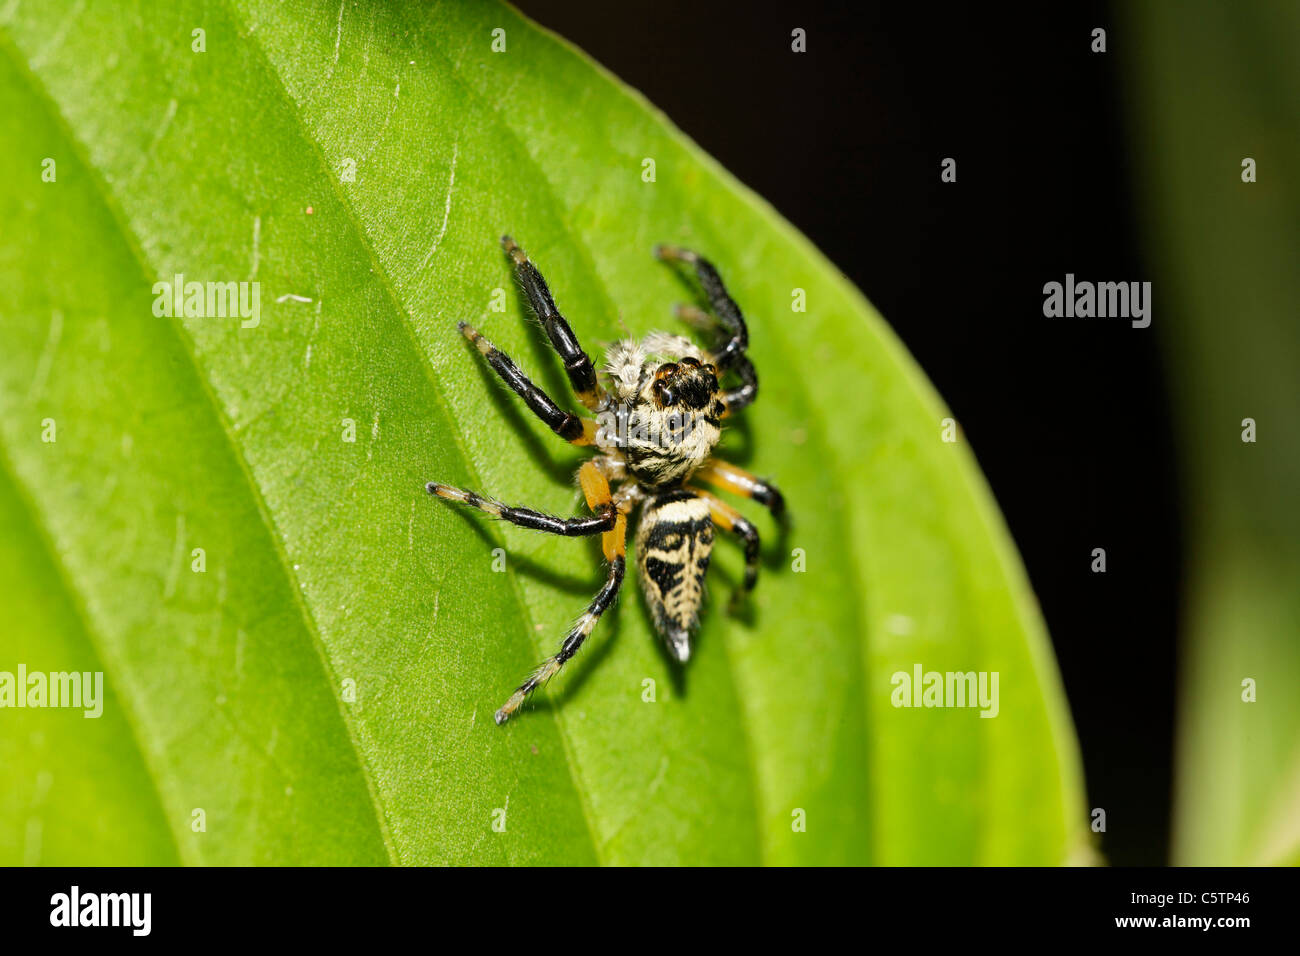 Costa Rica, Jumping spider on leaf Stock Photo